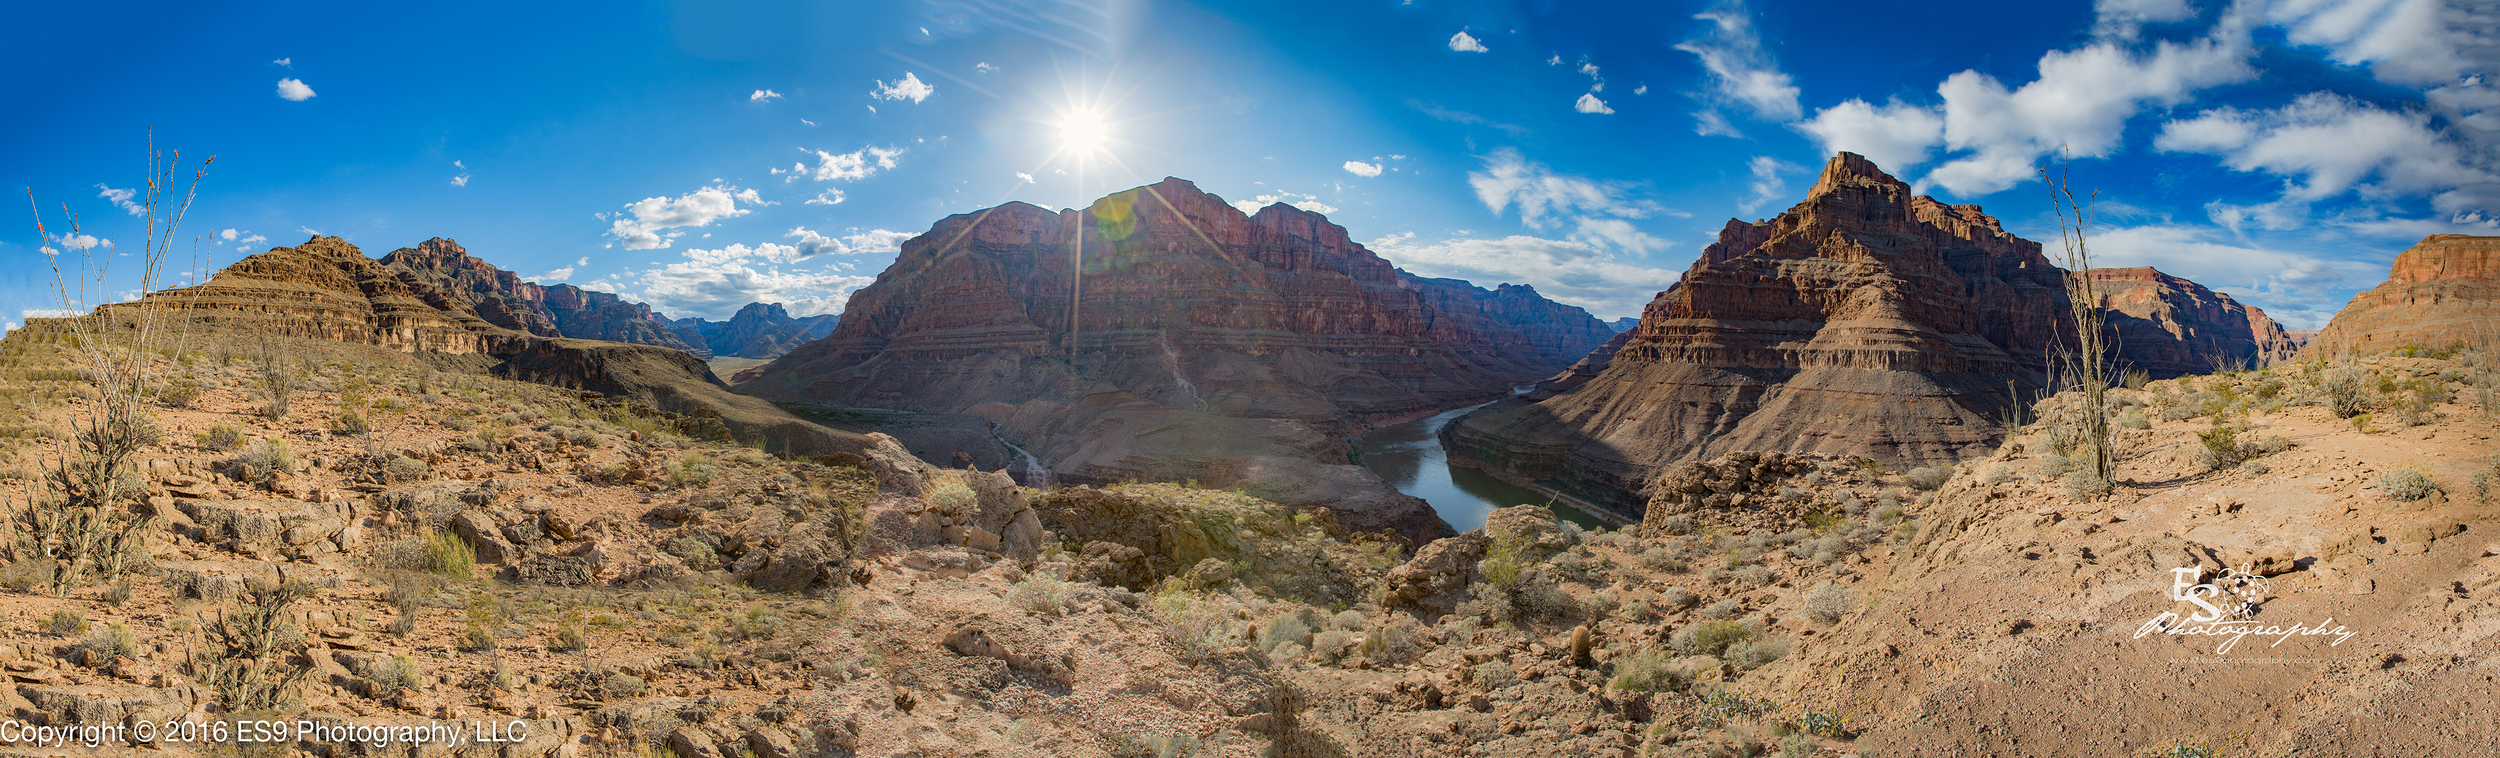 Grand Canyon West Panorama10 Sundance Helicopter Tour @ ES9 Photography 2016 copy.jpg